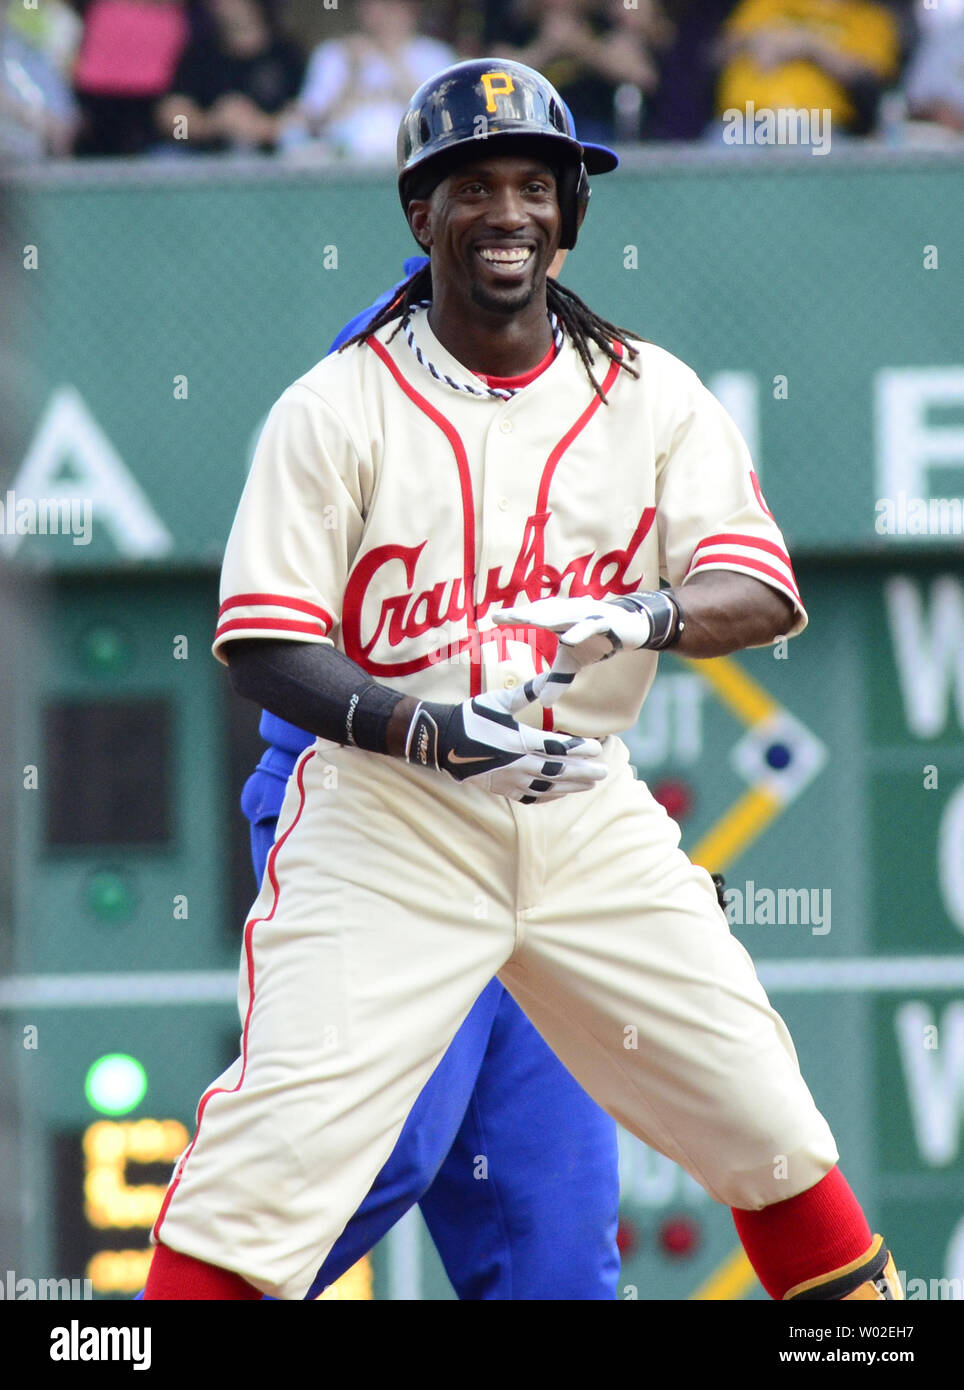 Pittsburgh Pirates center fielder Andrew McCutchen (22) celebrates hitting  double in the fourth inning of the New York Mets 5-3 win at PNC Park in  Pittsburgh, on June 28, 2014. The Pirates